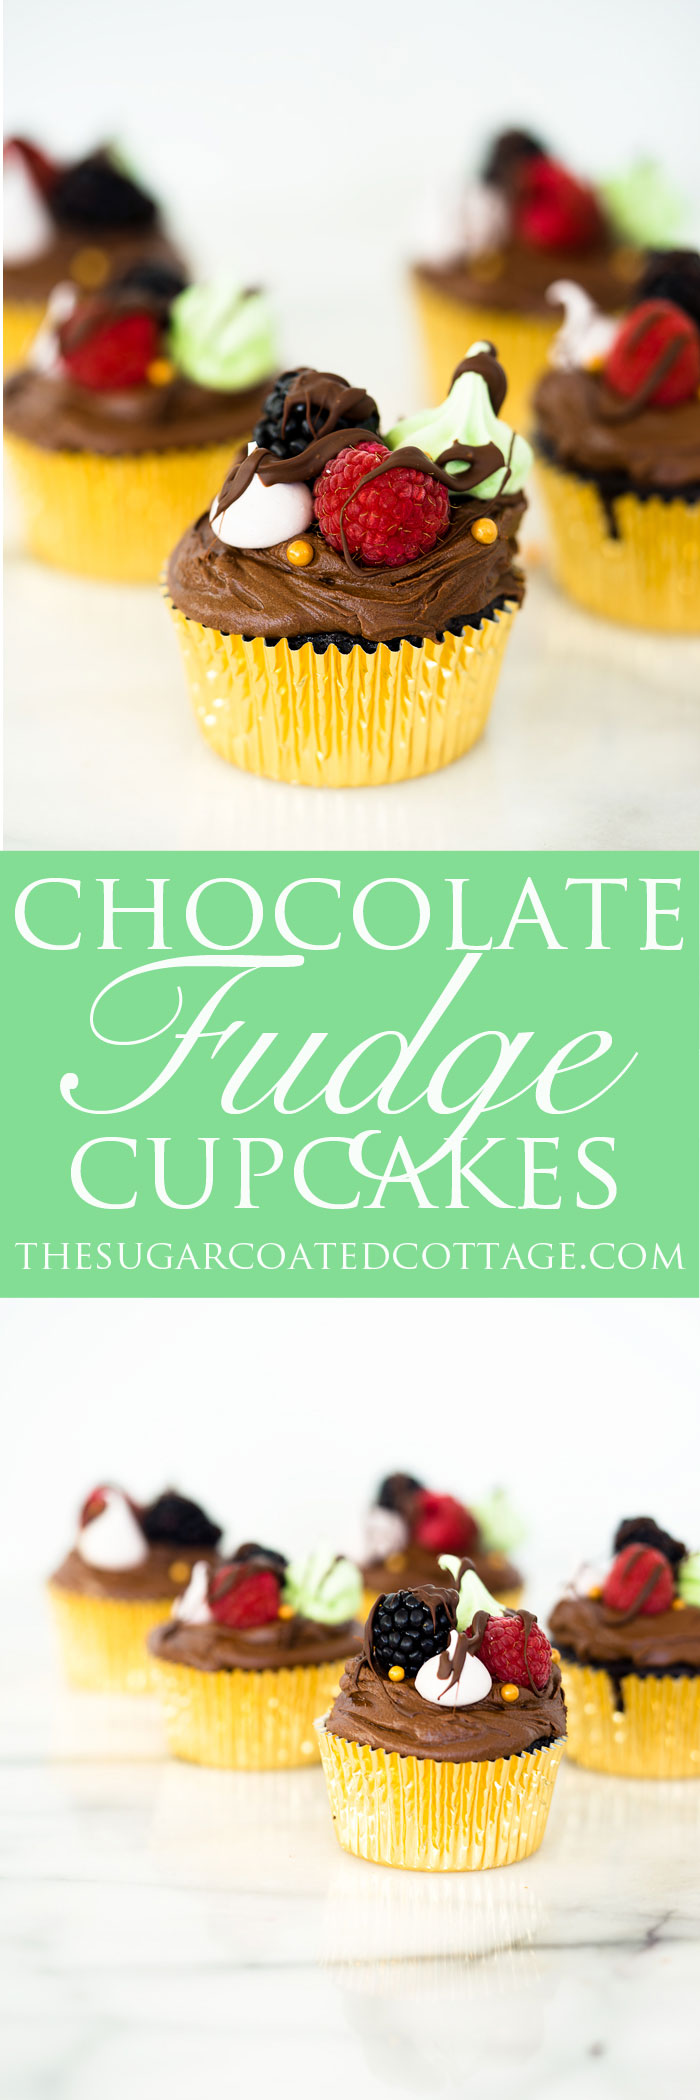 Chocolatey Fudge Cupcake Recipe. Moist, fluffy, pillowy cupcakes in a swirl of fudge chocolate frosting. Decorated in fresh berries and crisp meringues. | thesugarcoatedcottage.com